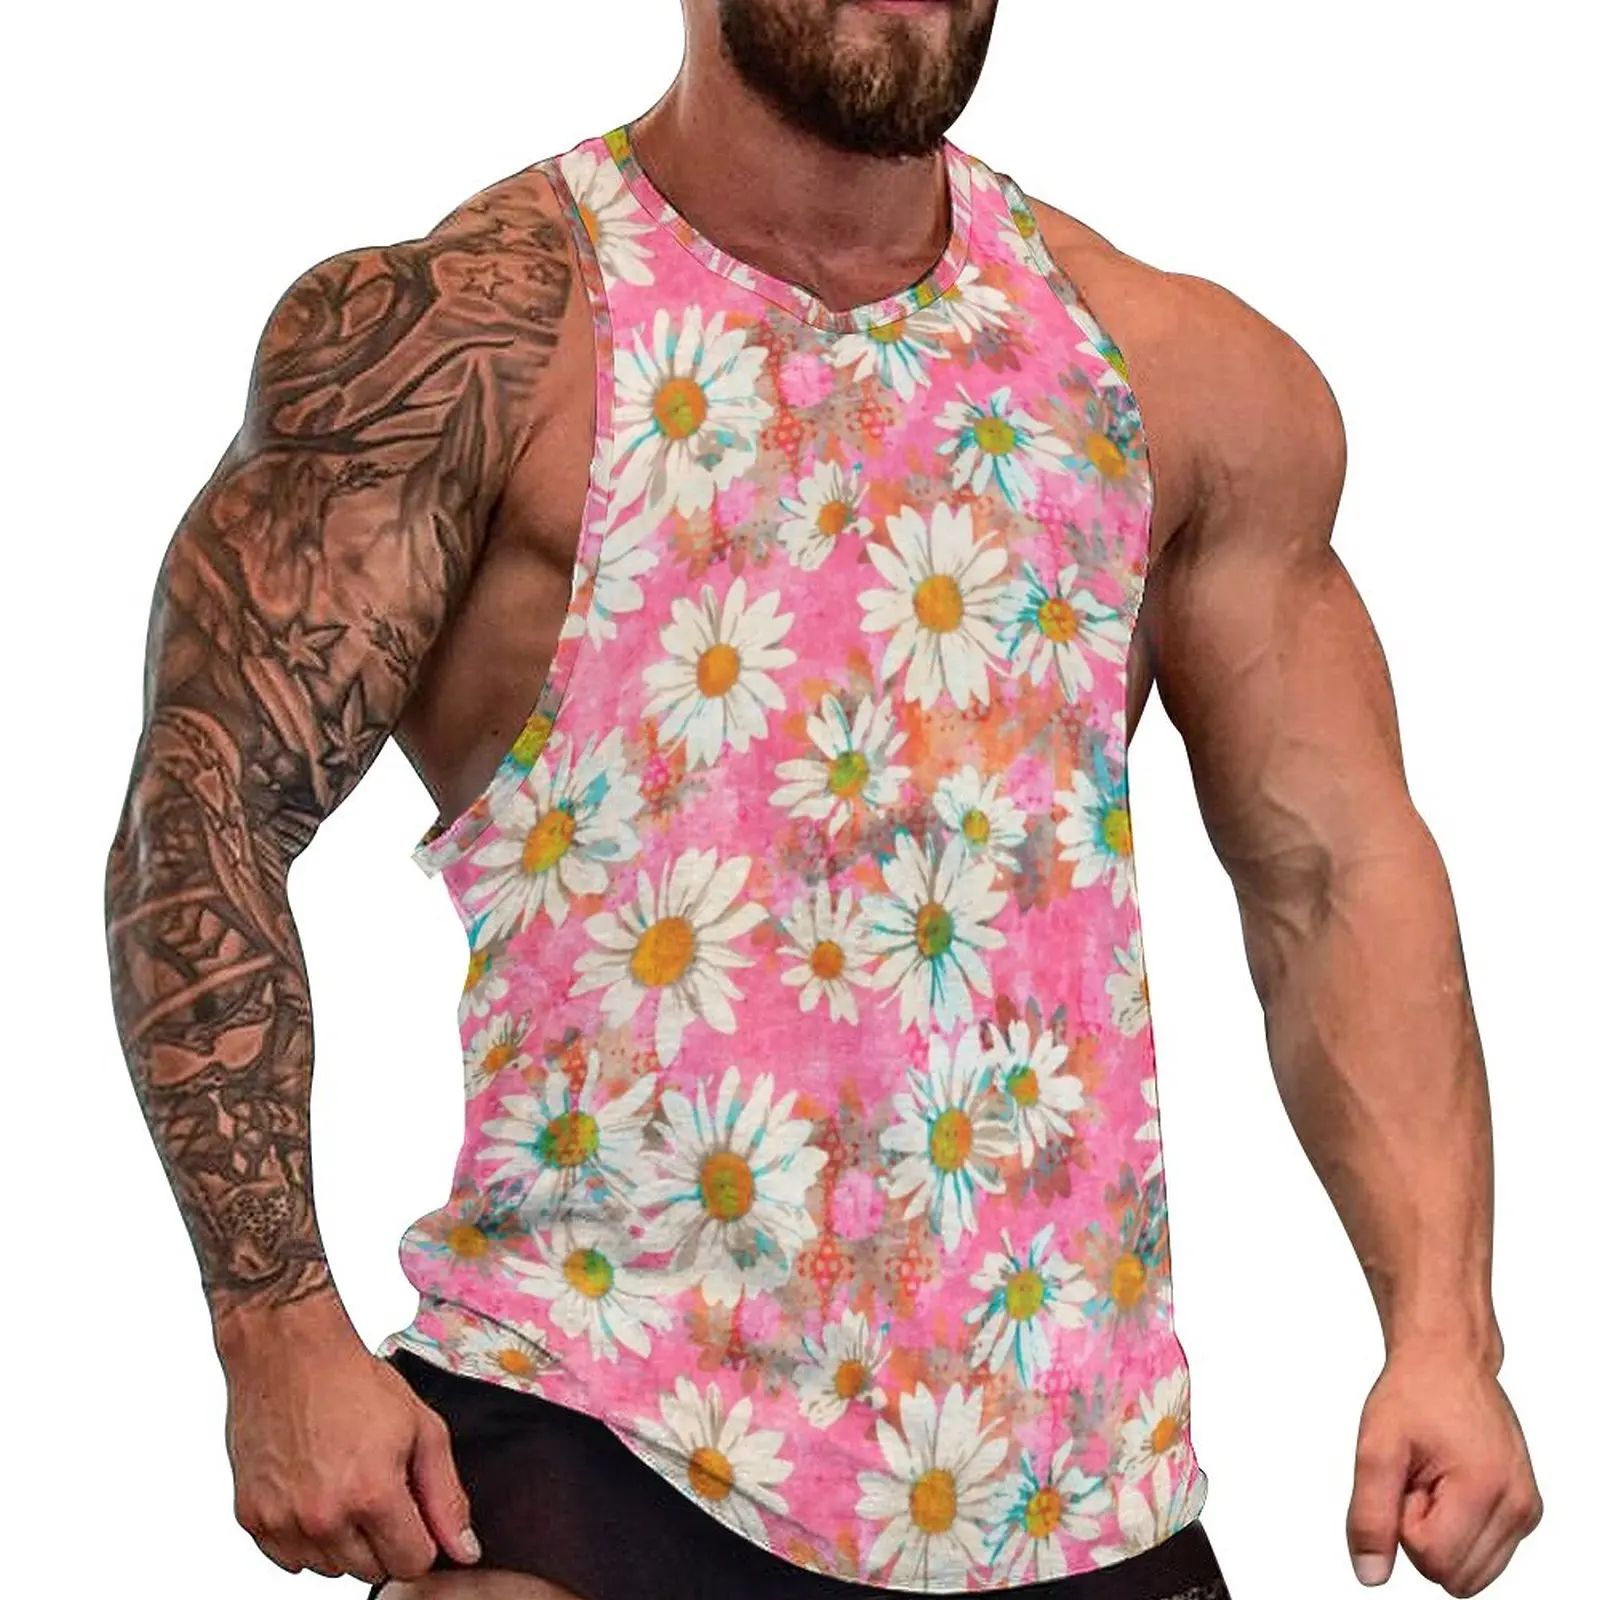 

White Daisy Tank Top Mens Pink Floral Print Tops Summer Custom Gym Fashion Oversized Sleeveless Vests